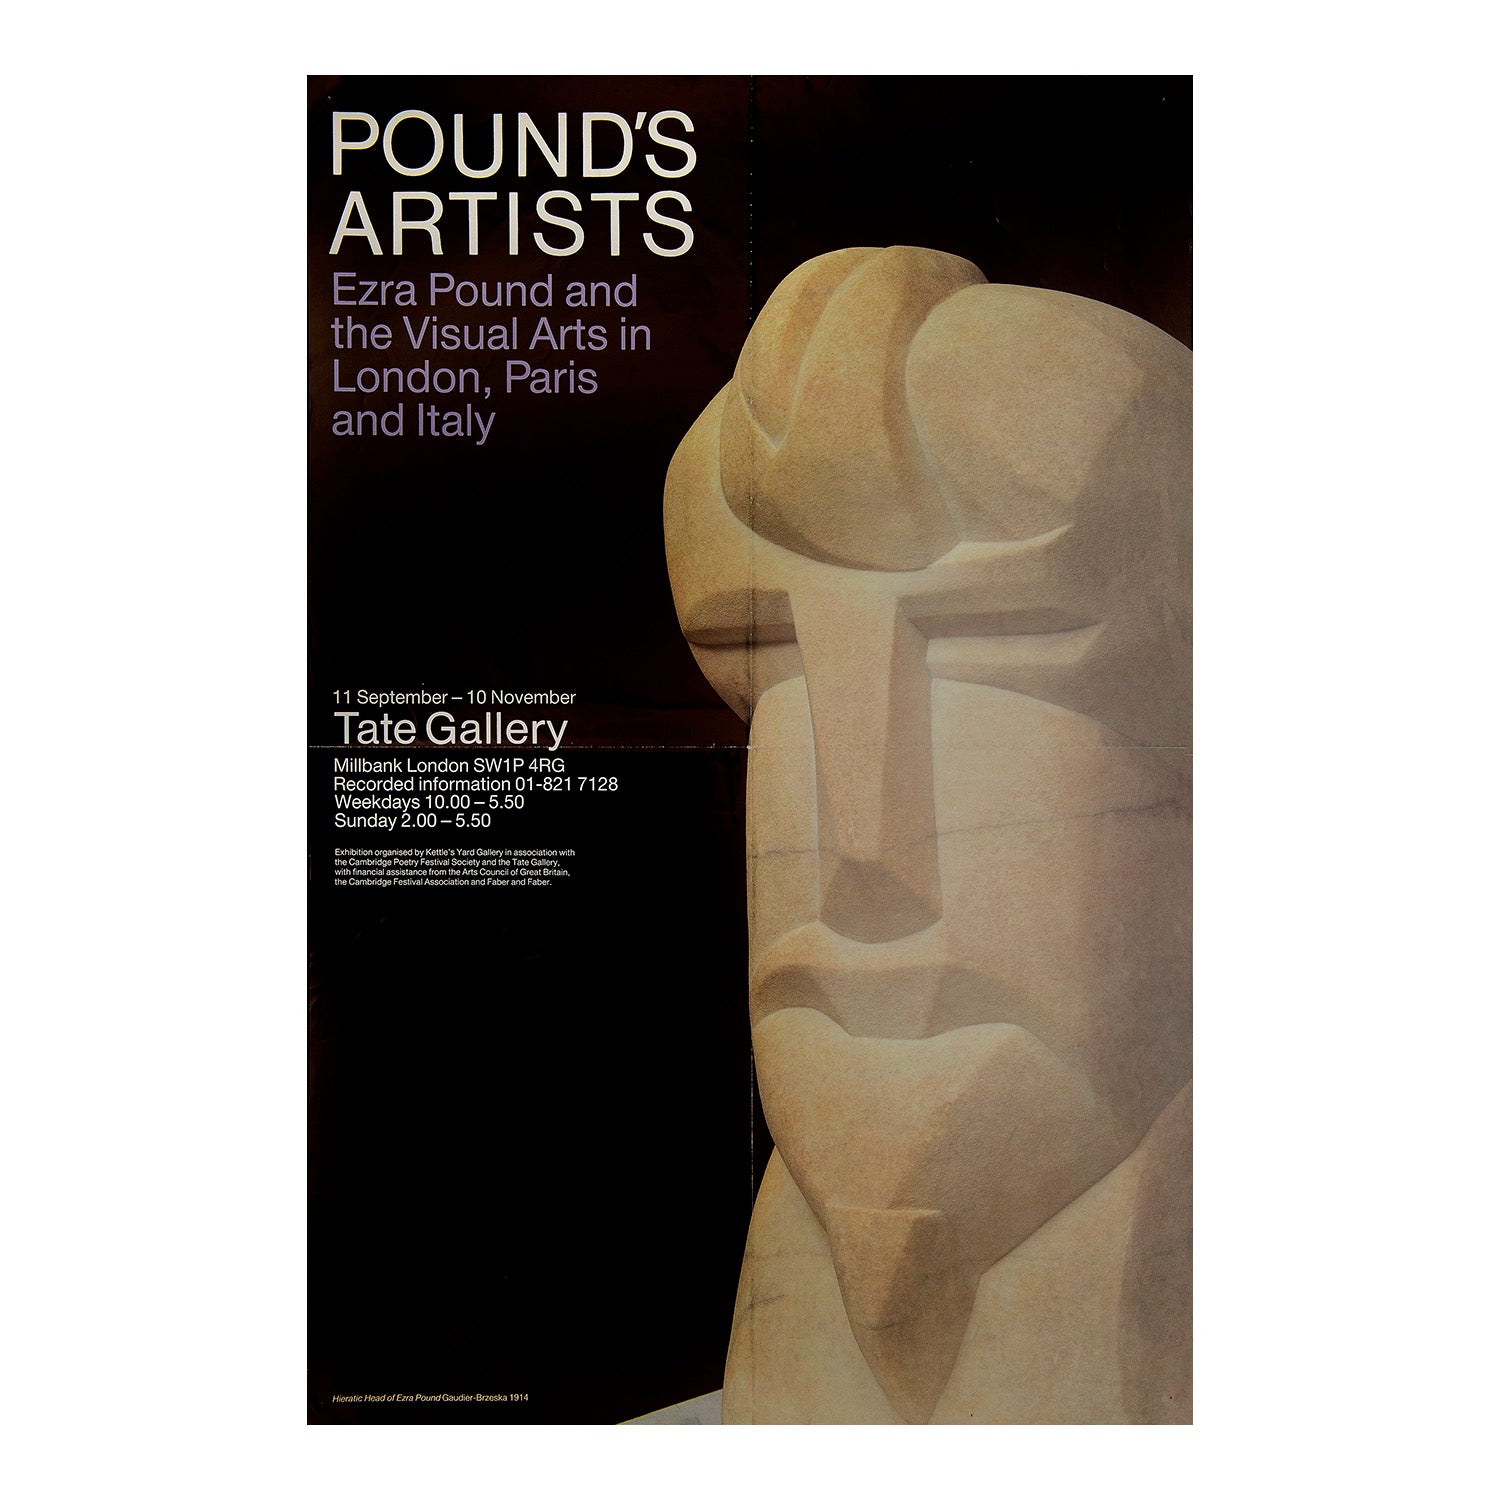 Pound's Artists. Ezra Pound and the Visual Arts in London, Paris and Italy